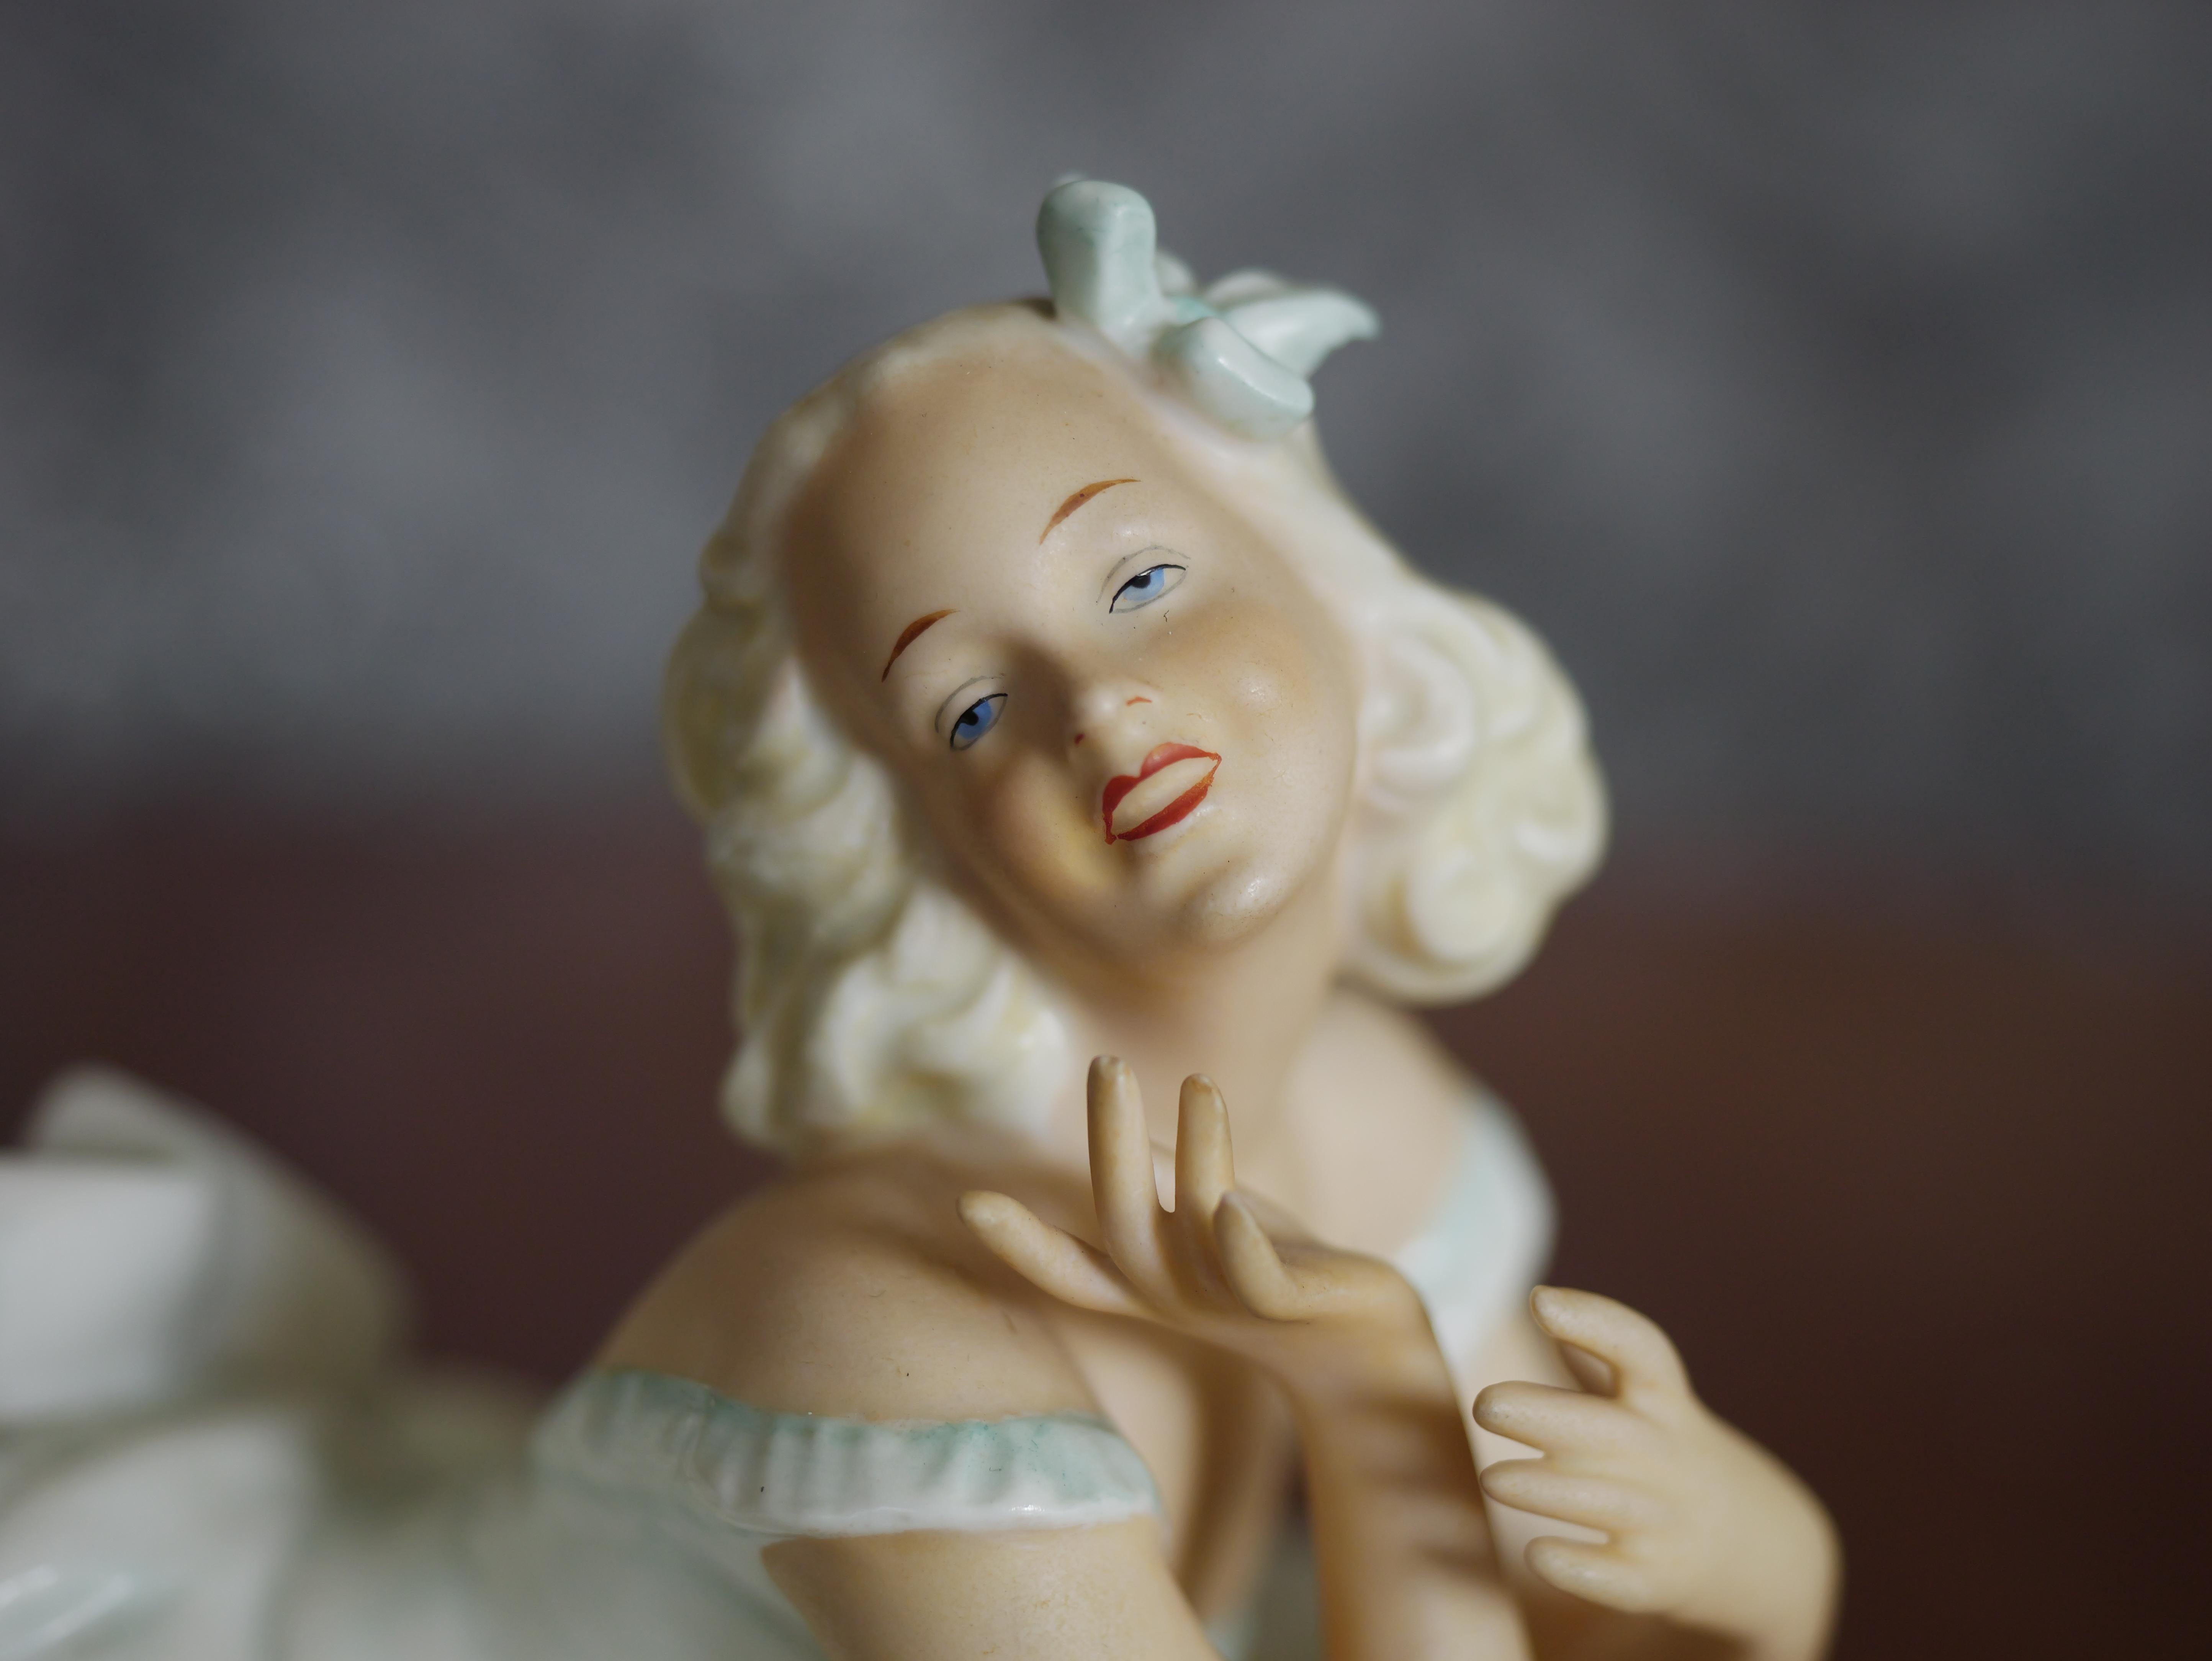 This vintage porcelain figure is a stunning example of Schaubach Kunst craftsmanship from the period between 1945 and 1965. The figure depicts a lady in a graceful reclining pose, elegantly dressed in a flowing white gown. The attention to detail is